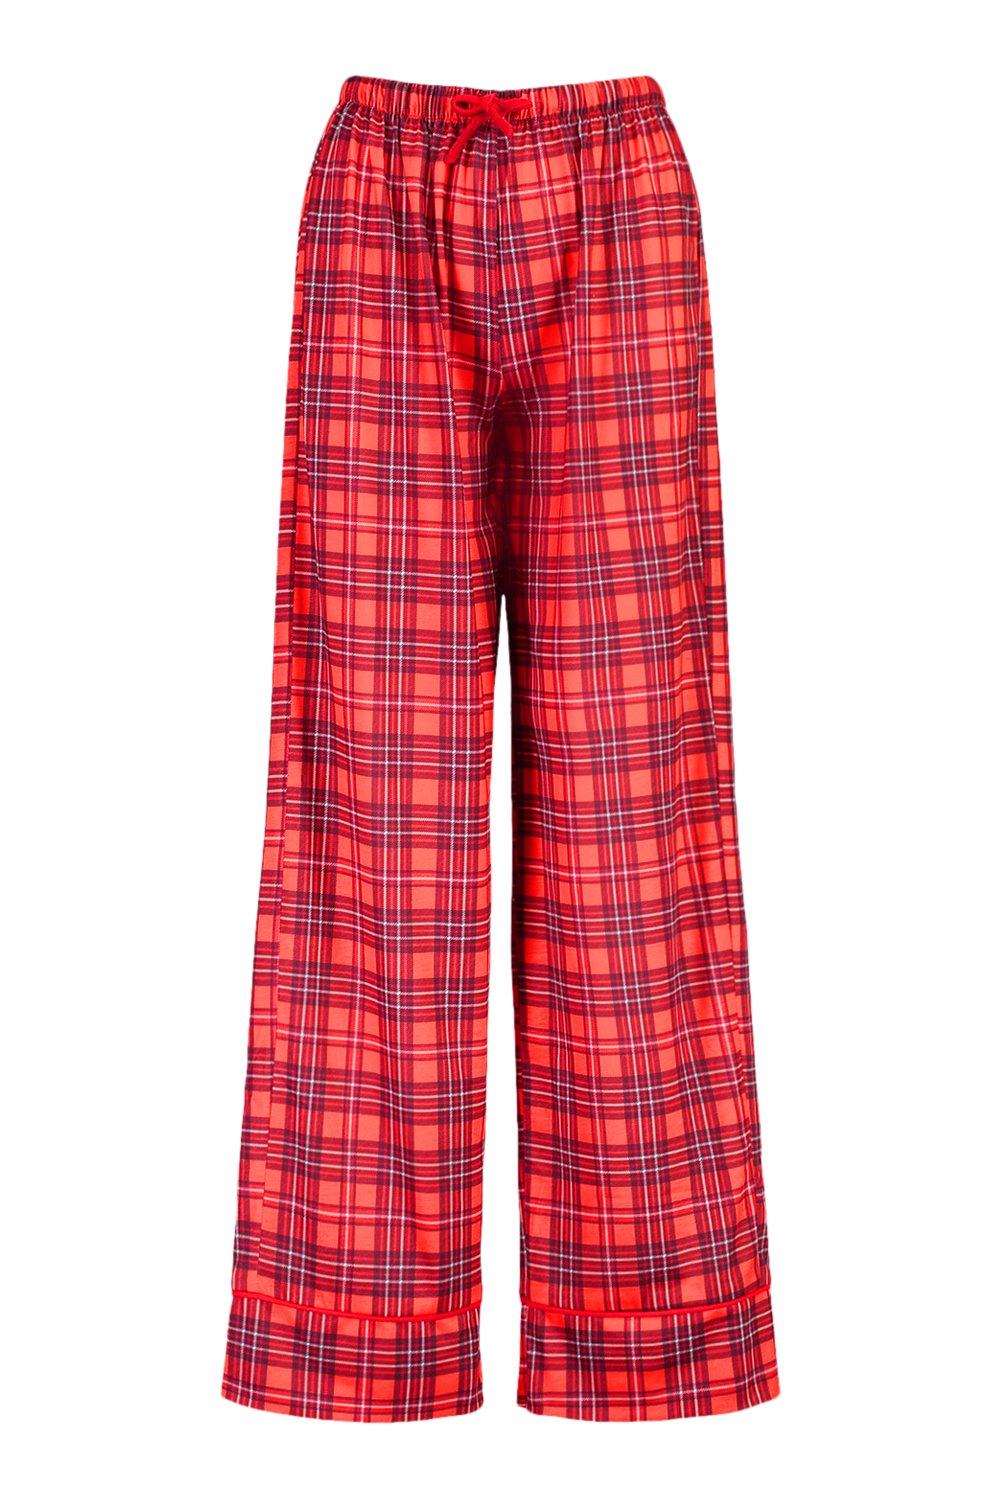 Mix And Match Flannel Pj Shorts